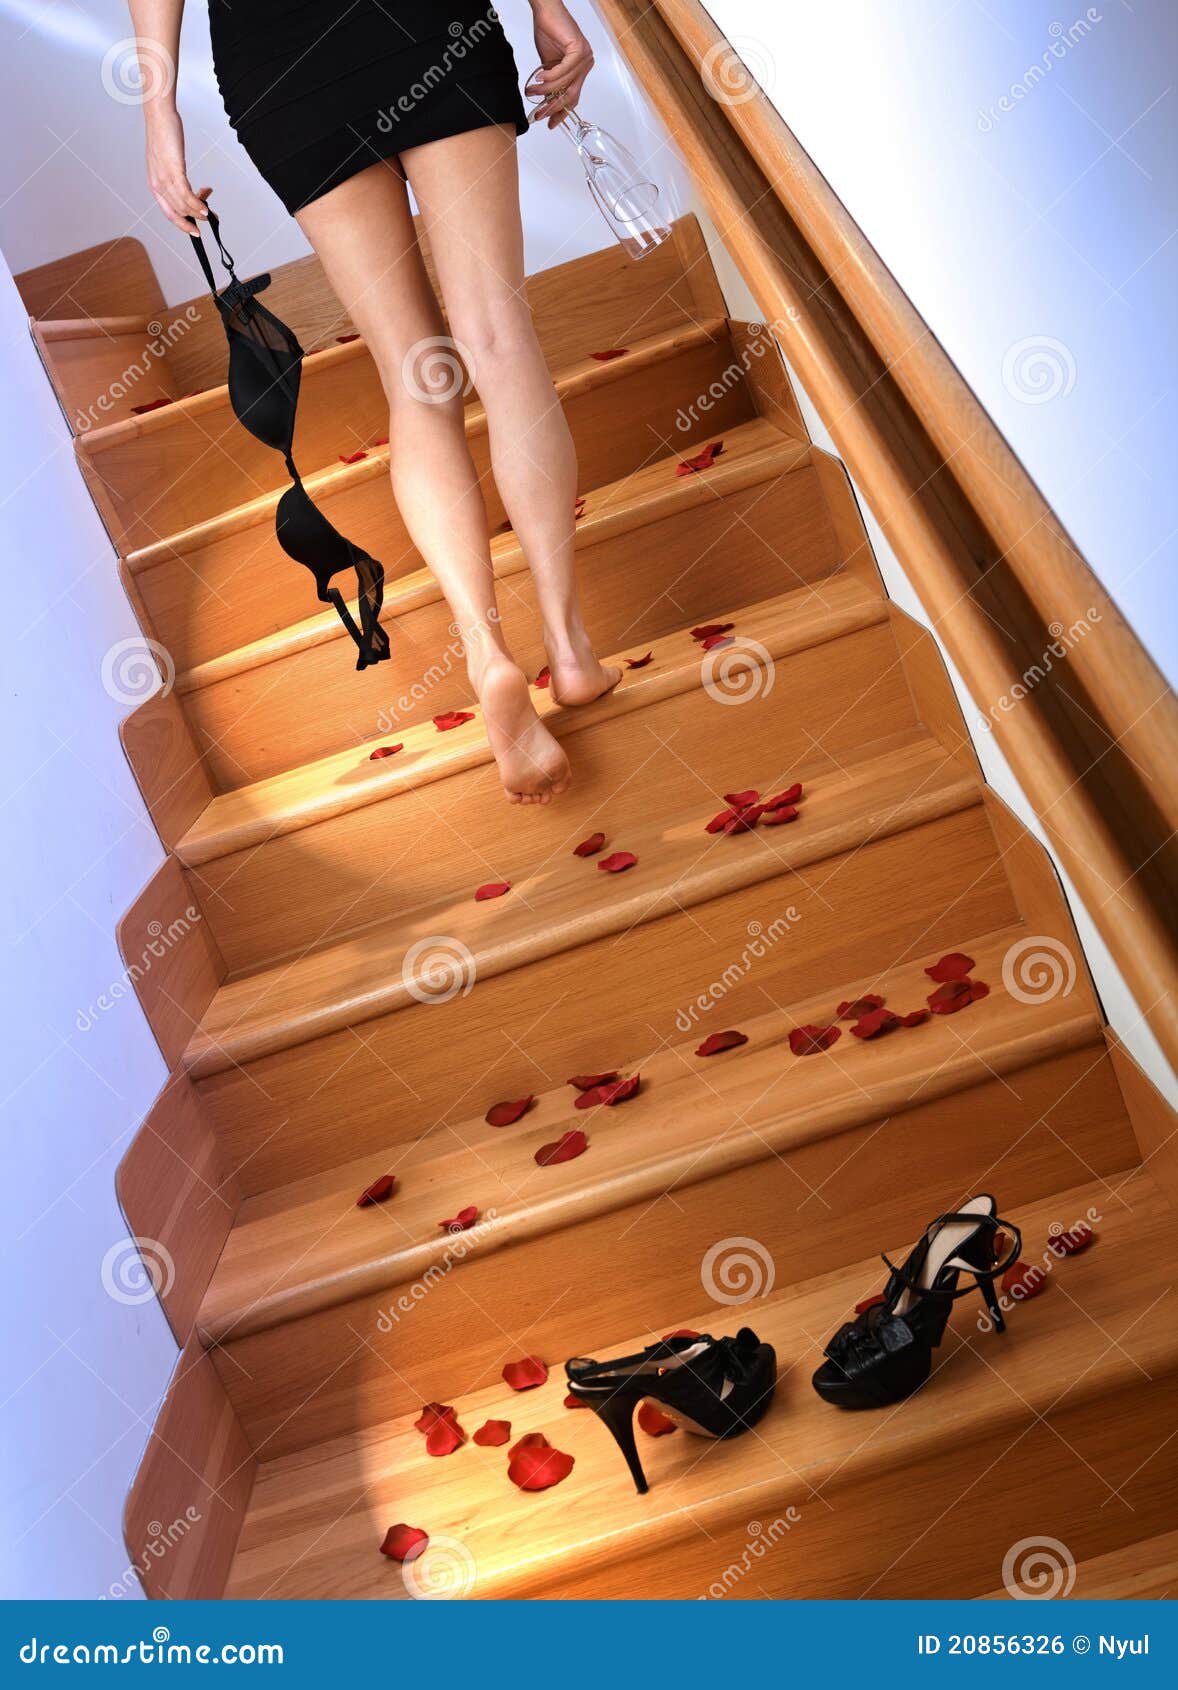 short skirts on the stairs